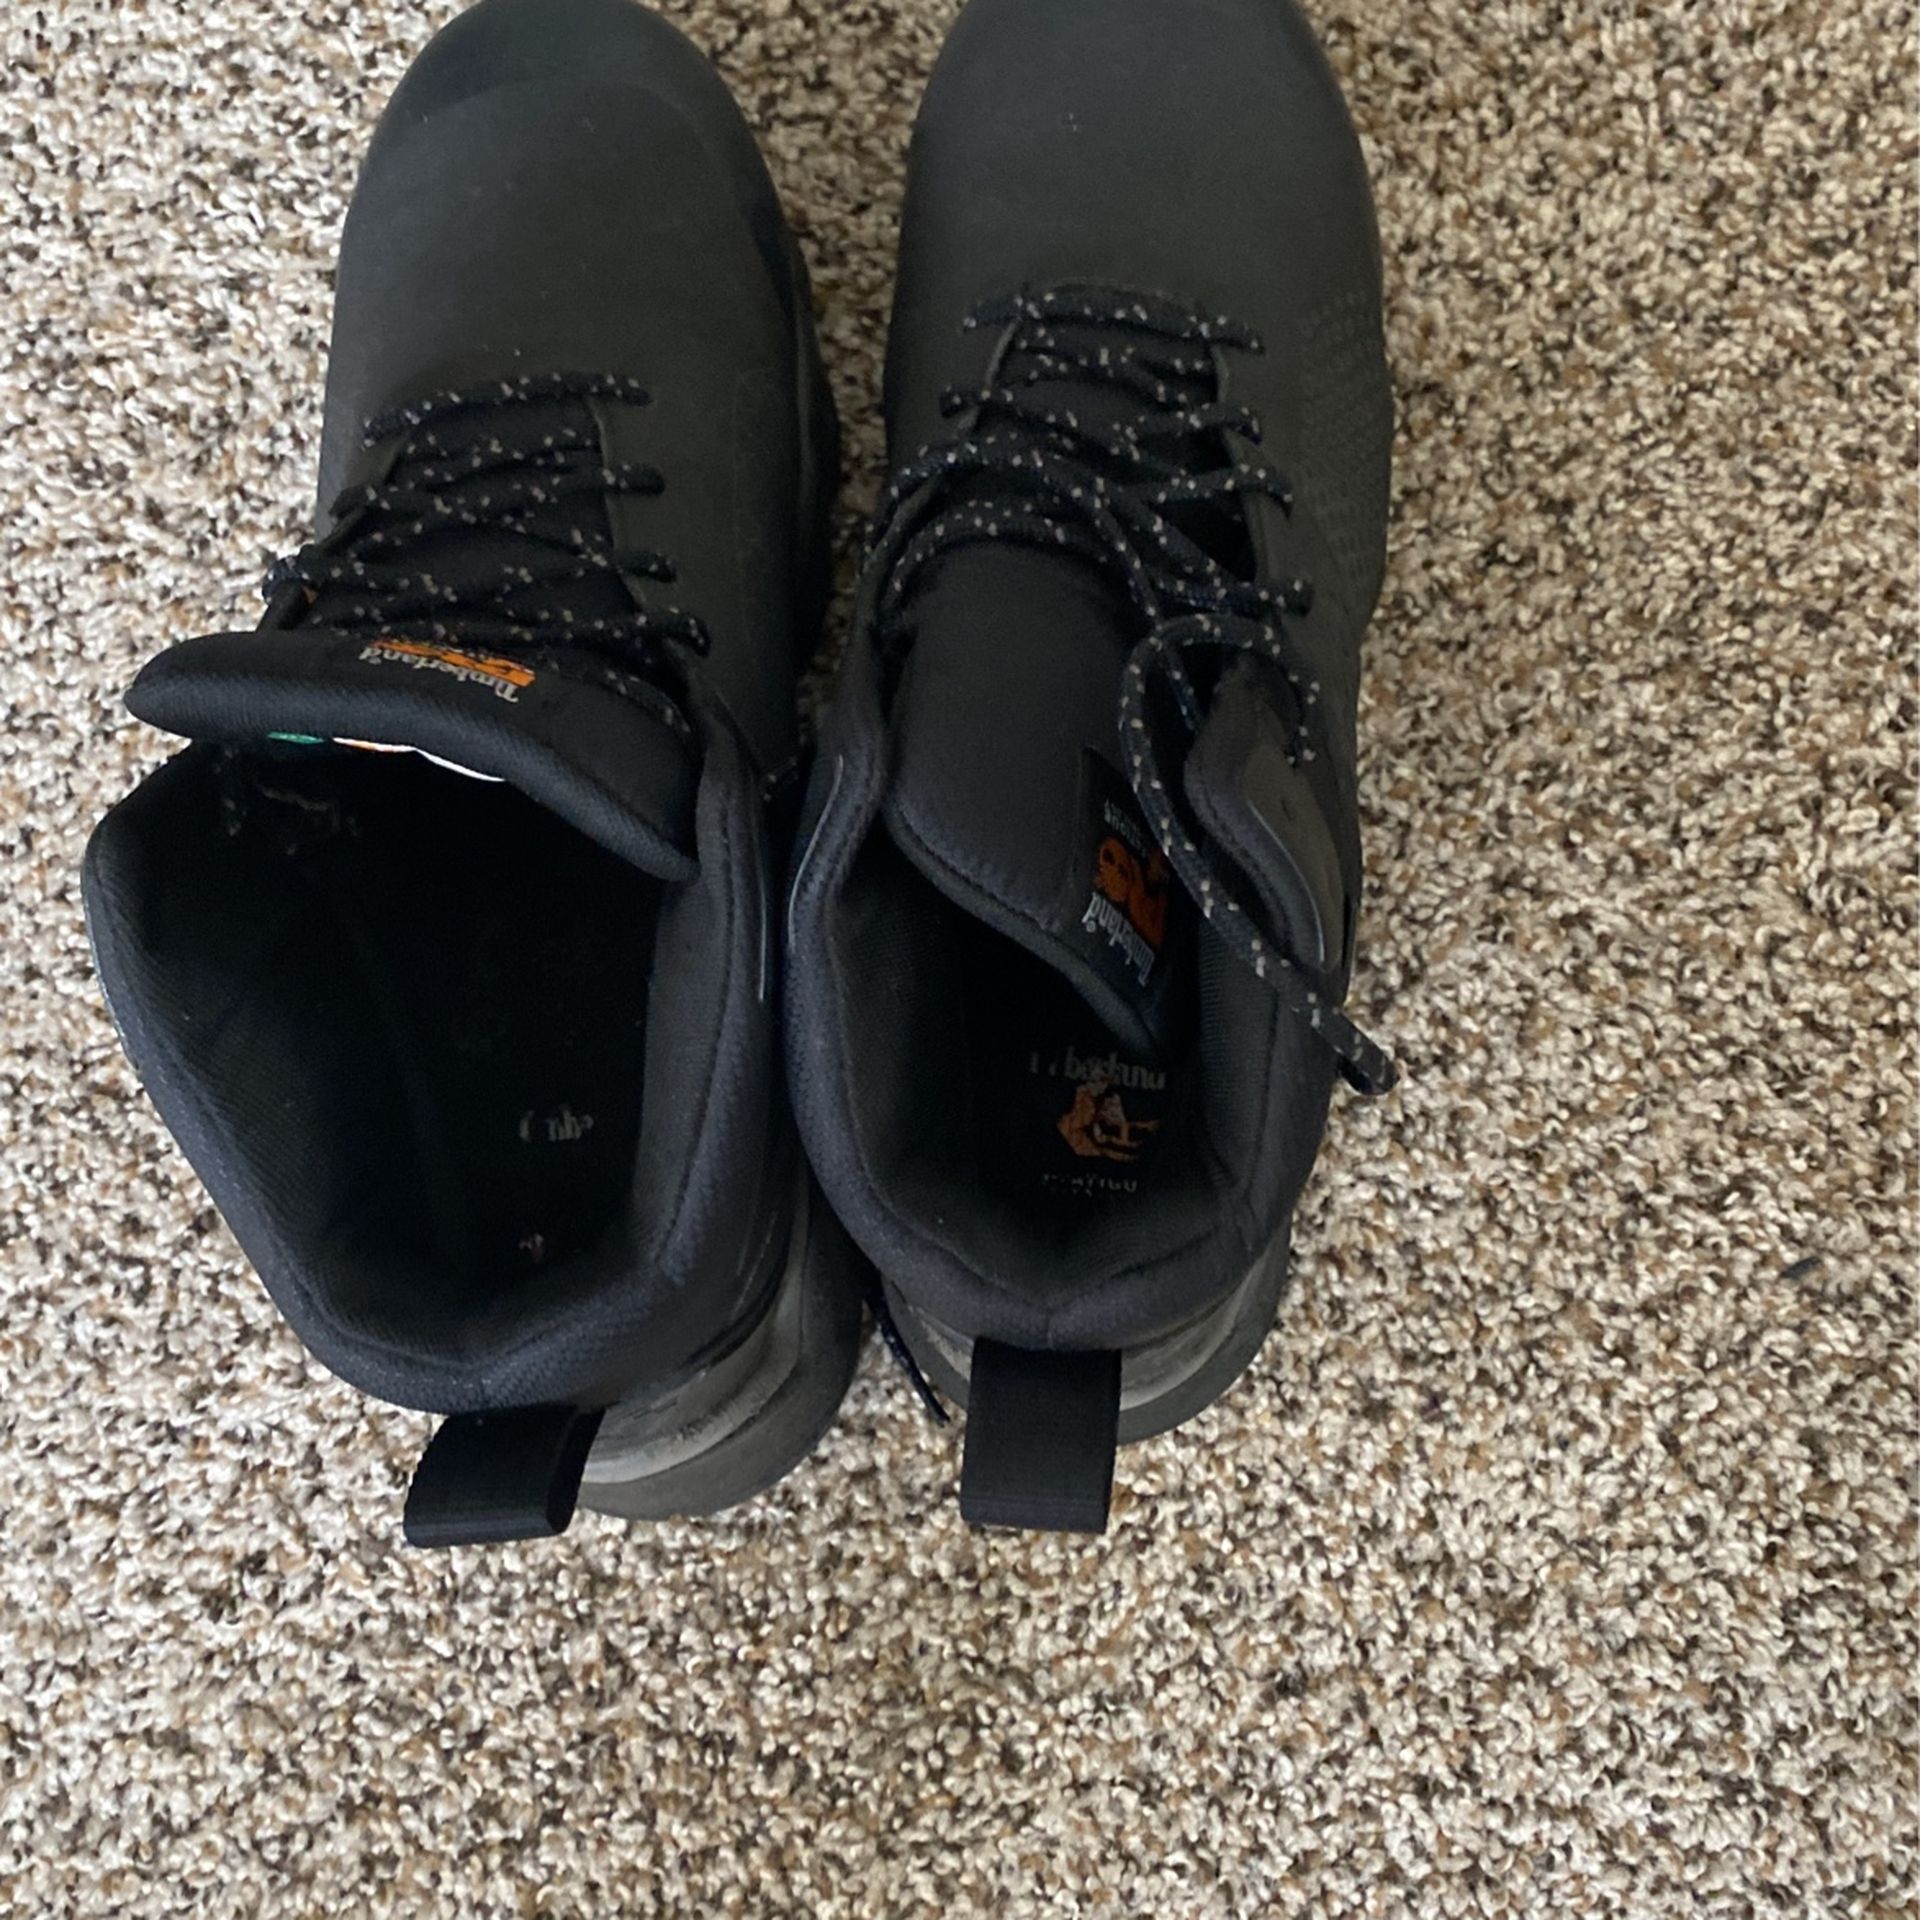 Timberland Steel Toe Work Boots Size 12